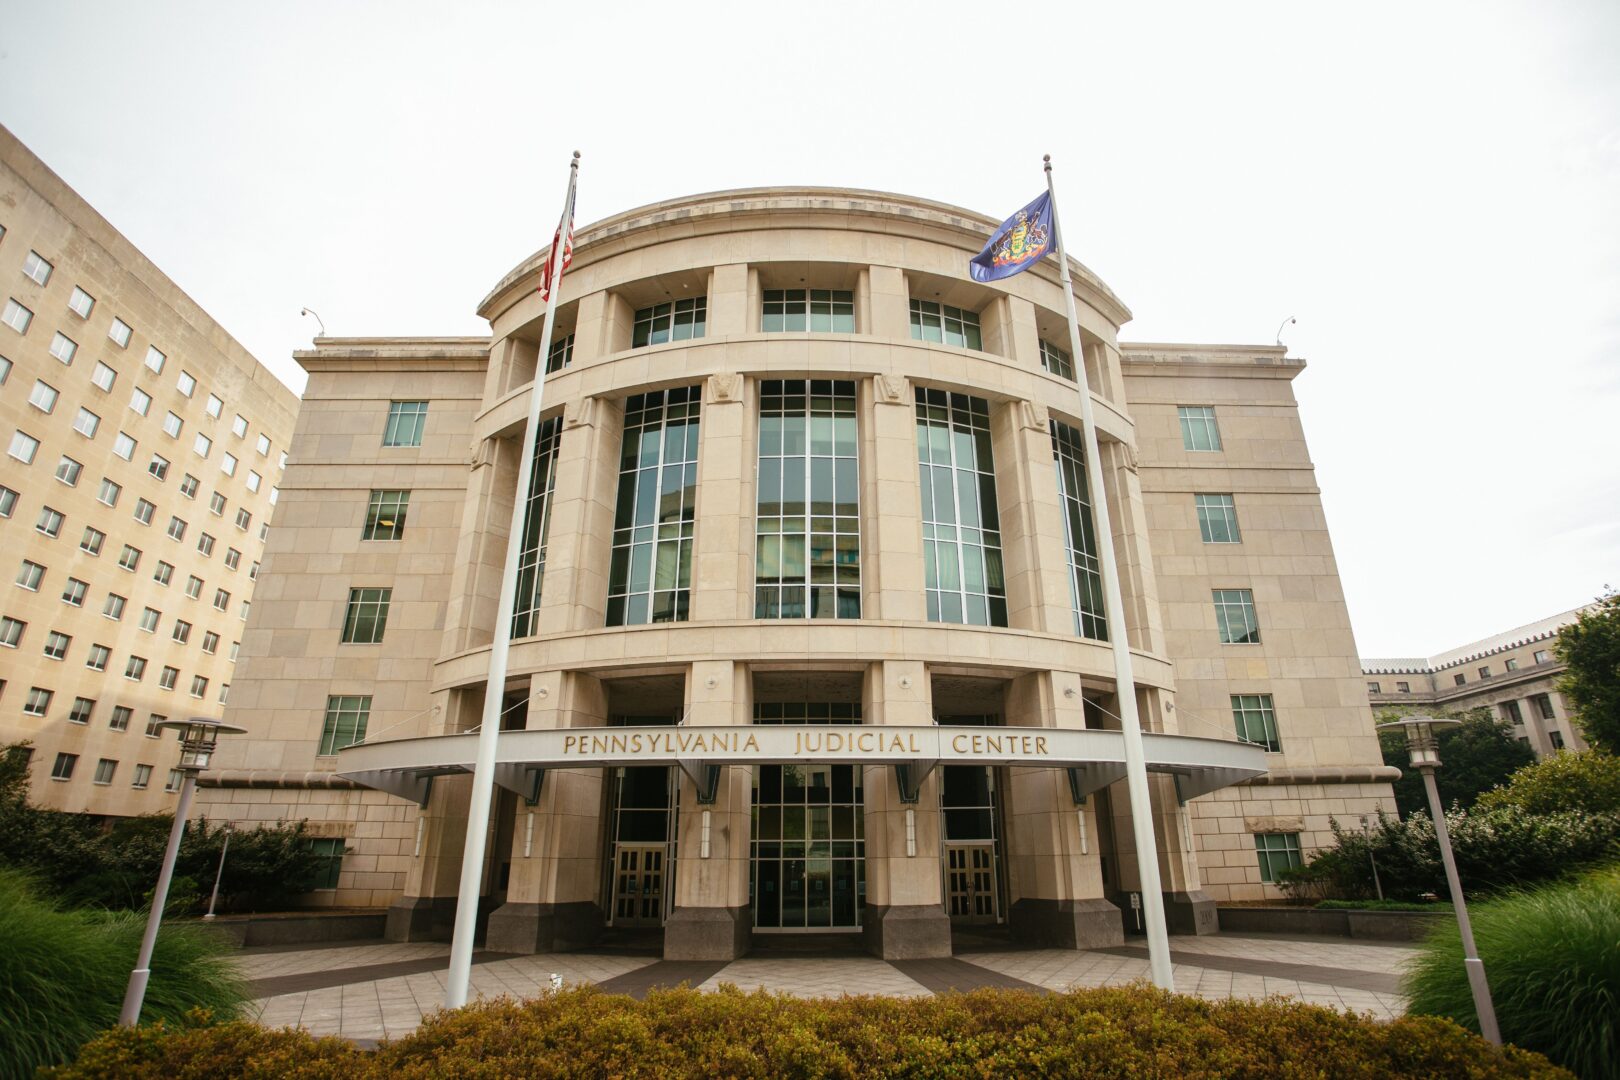 The exterior to the Pennsylvania Judicial Center in Harrisburg, home of the Commonwealth Court.